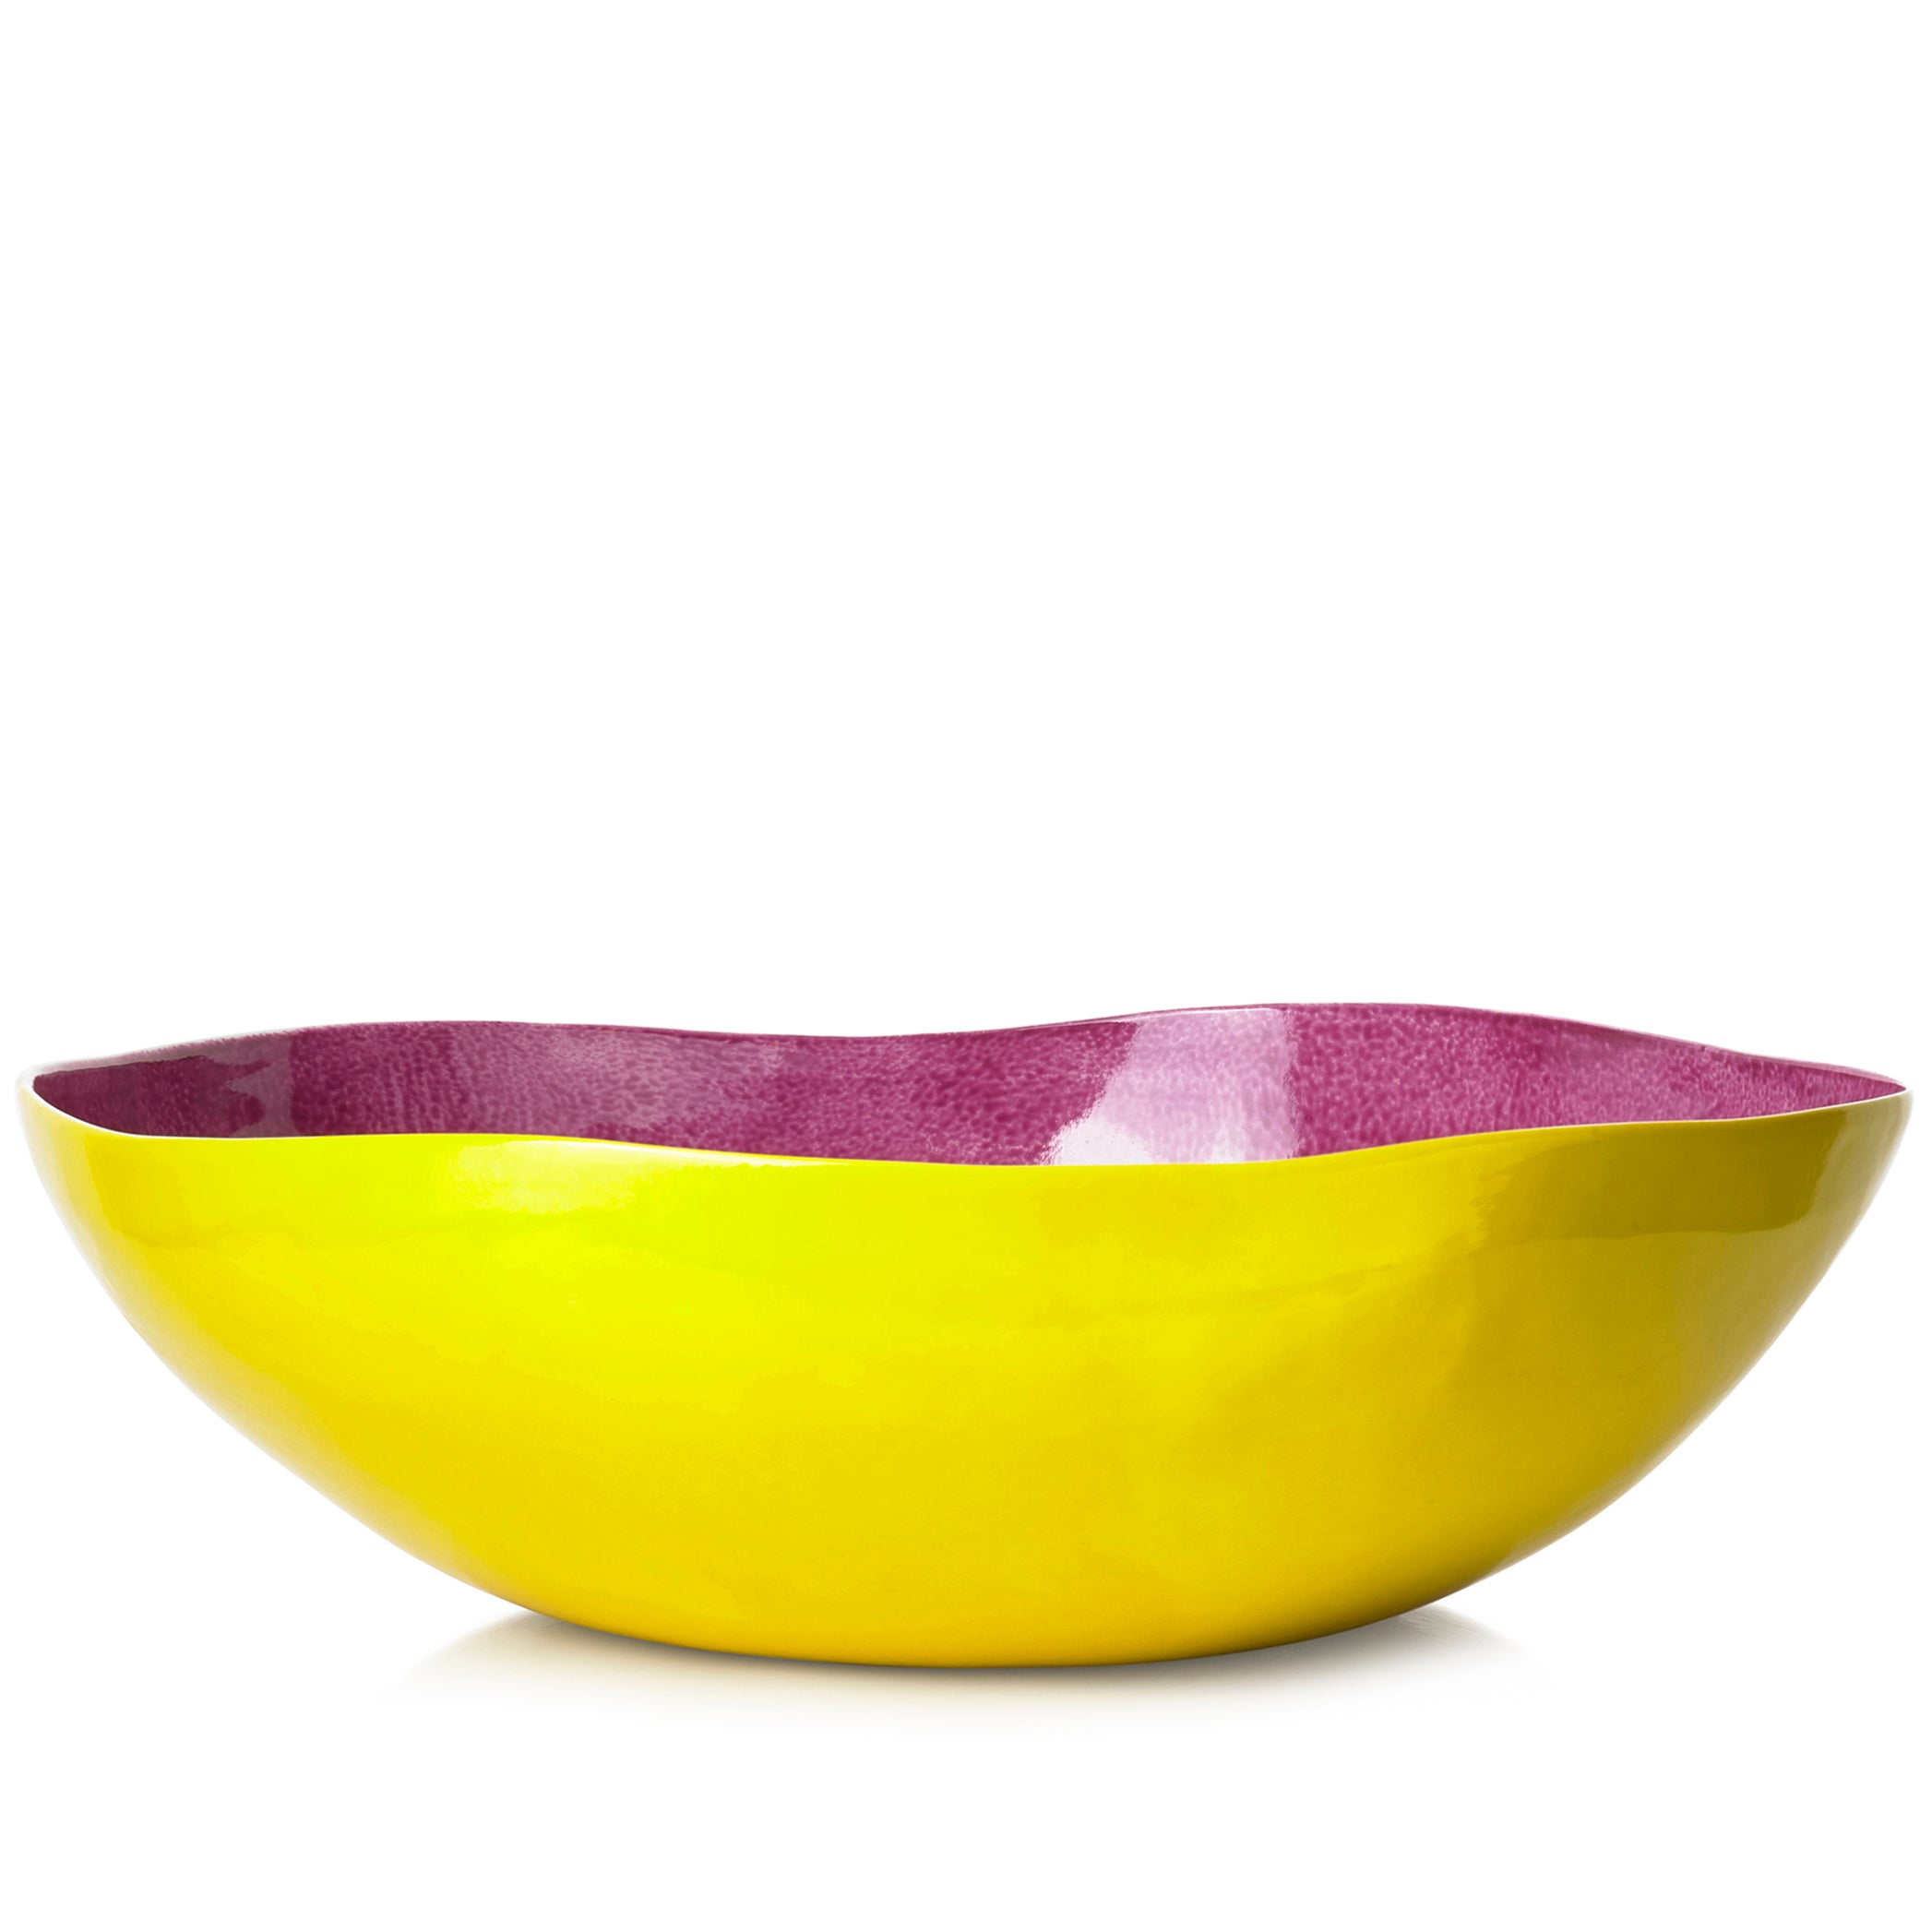 Summerill & Bishop Handmade 43cm Porcelain Extra Large Salad Bowl in Two Tone Pink and Yellow